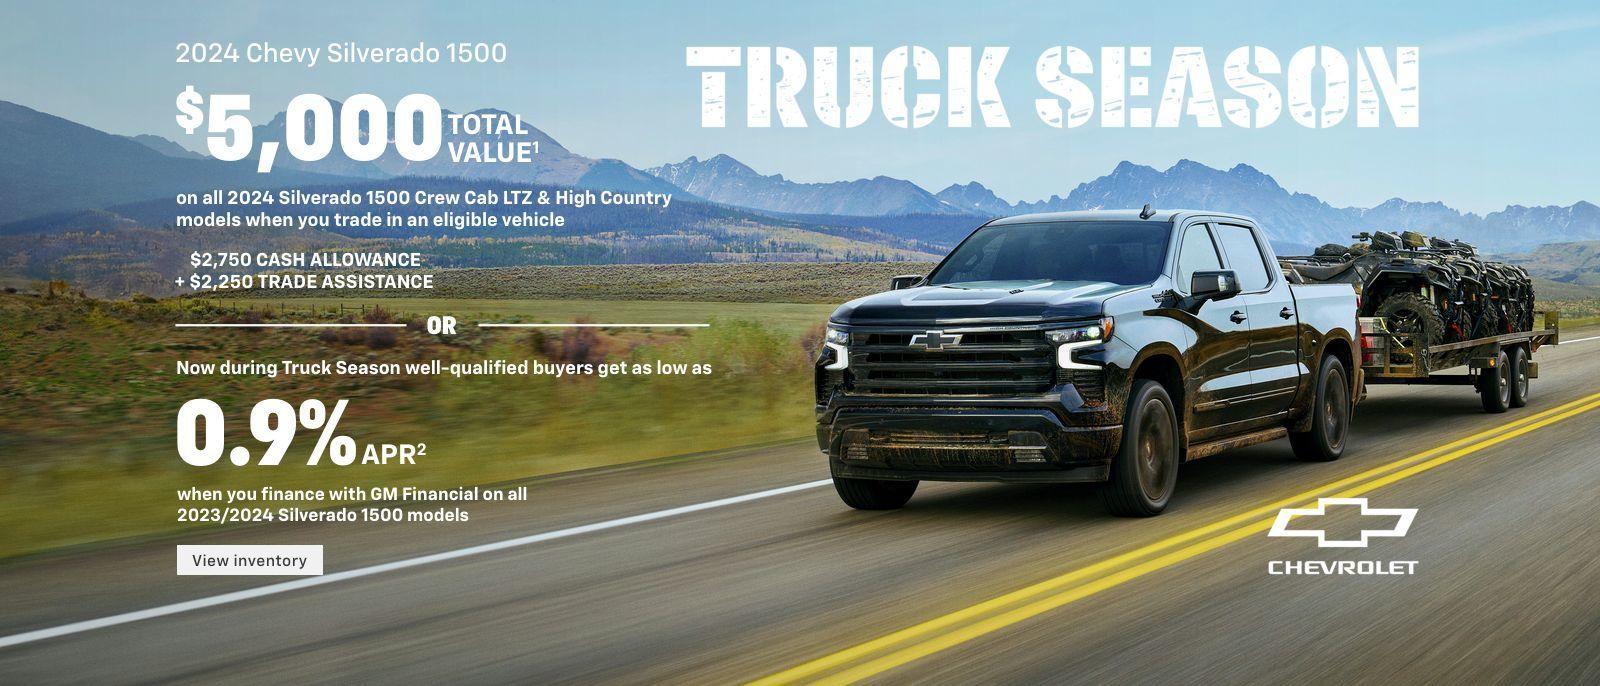 $5,000 total value on all 2024 Silverado 1500 Crew Cab LTZ & High Country models when you trade in an eligible vehicle. $2,750 Cash Allowance + $2,250 Trade Assistance. Or, Now during Truck Season well-qualified buyers get as low as 0.9% APR when you finance with GM Financial on all 2023/2024 Silverado 1500 models.